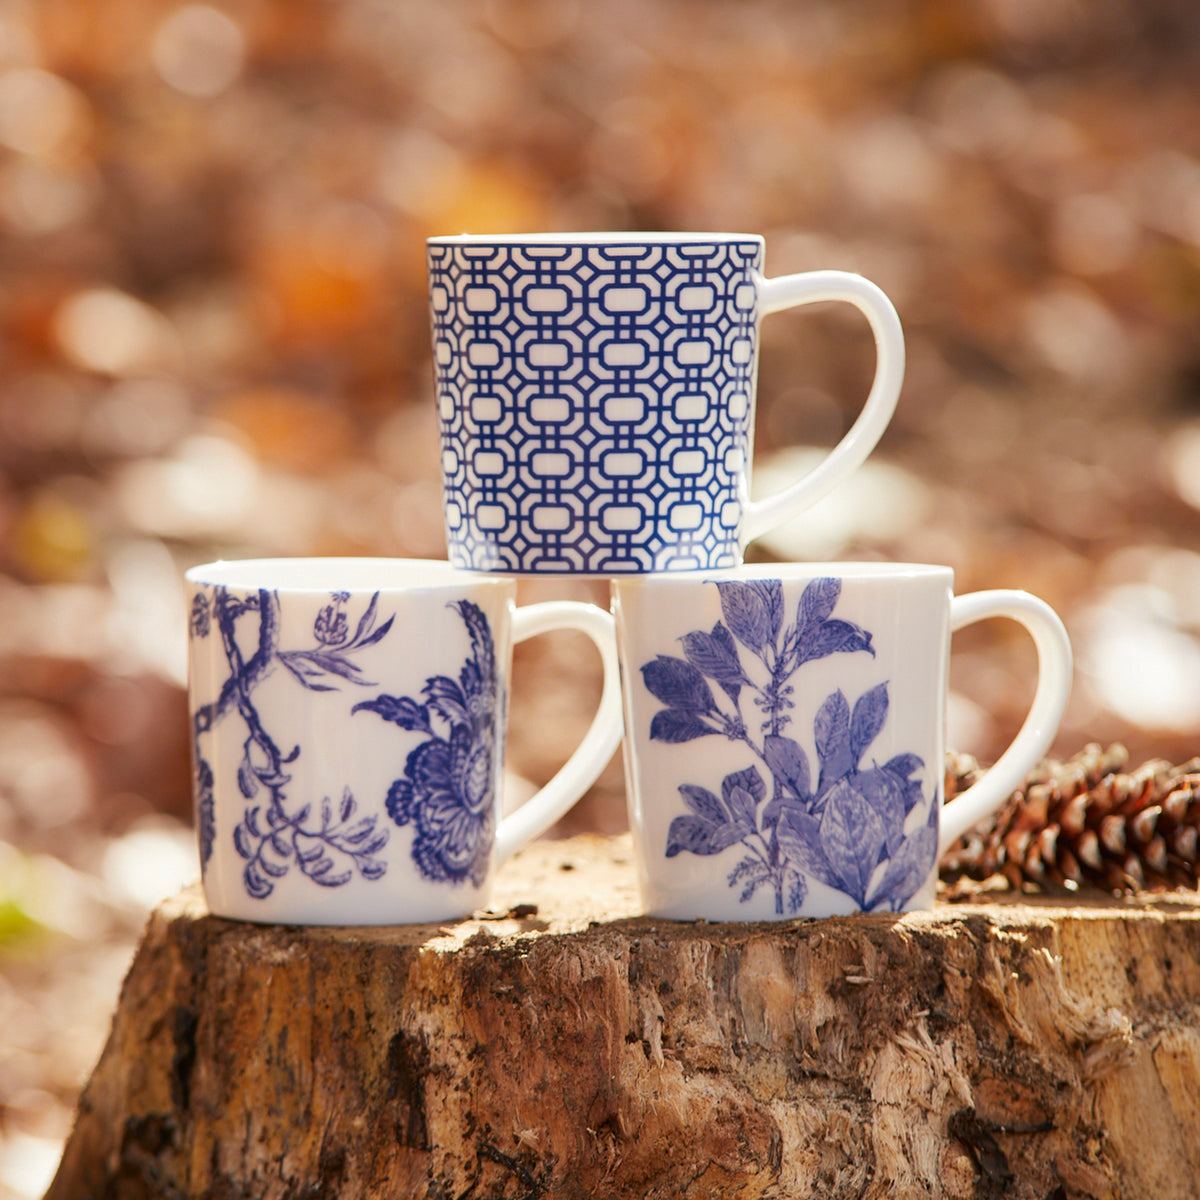 Three creamy white Newport Garden Gate Mugs by Caskata Artisanal Home with blue patterns sit on a tree stump outdoors. One features a geometric design, while the other two boast floral patterns. All are dishwasher and microwave safe.